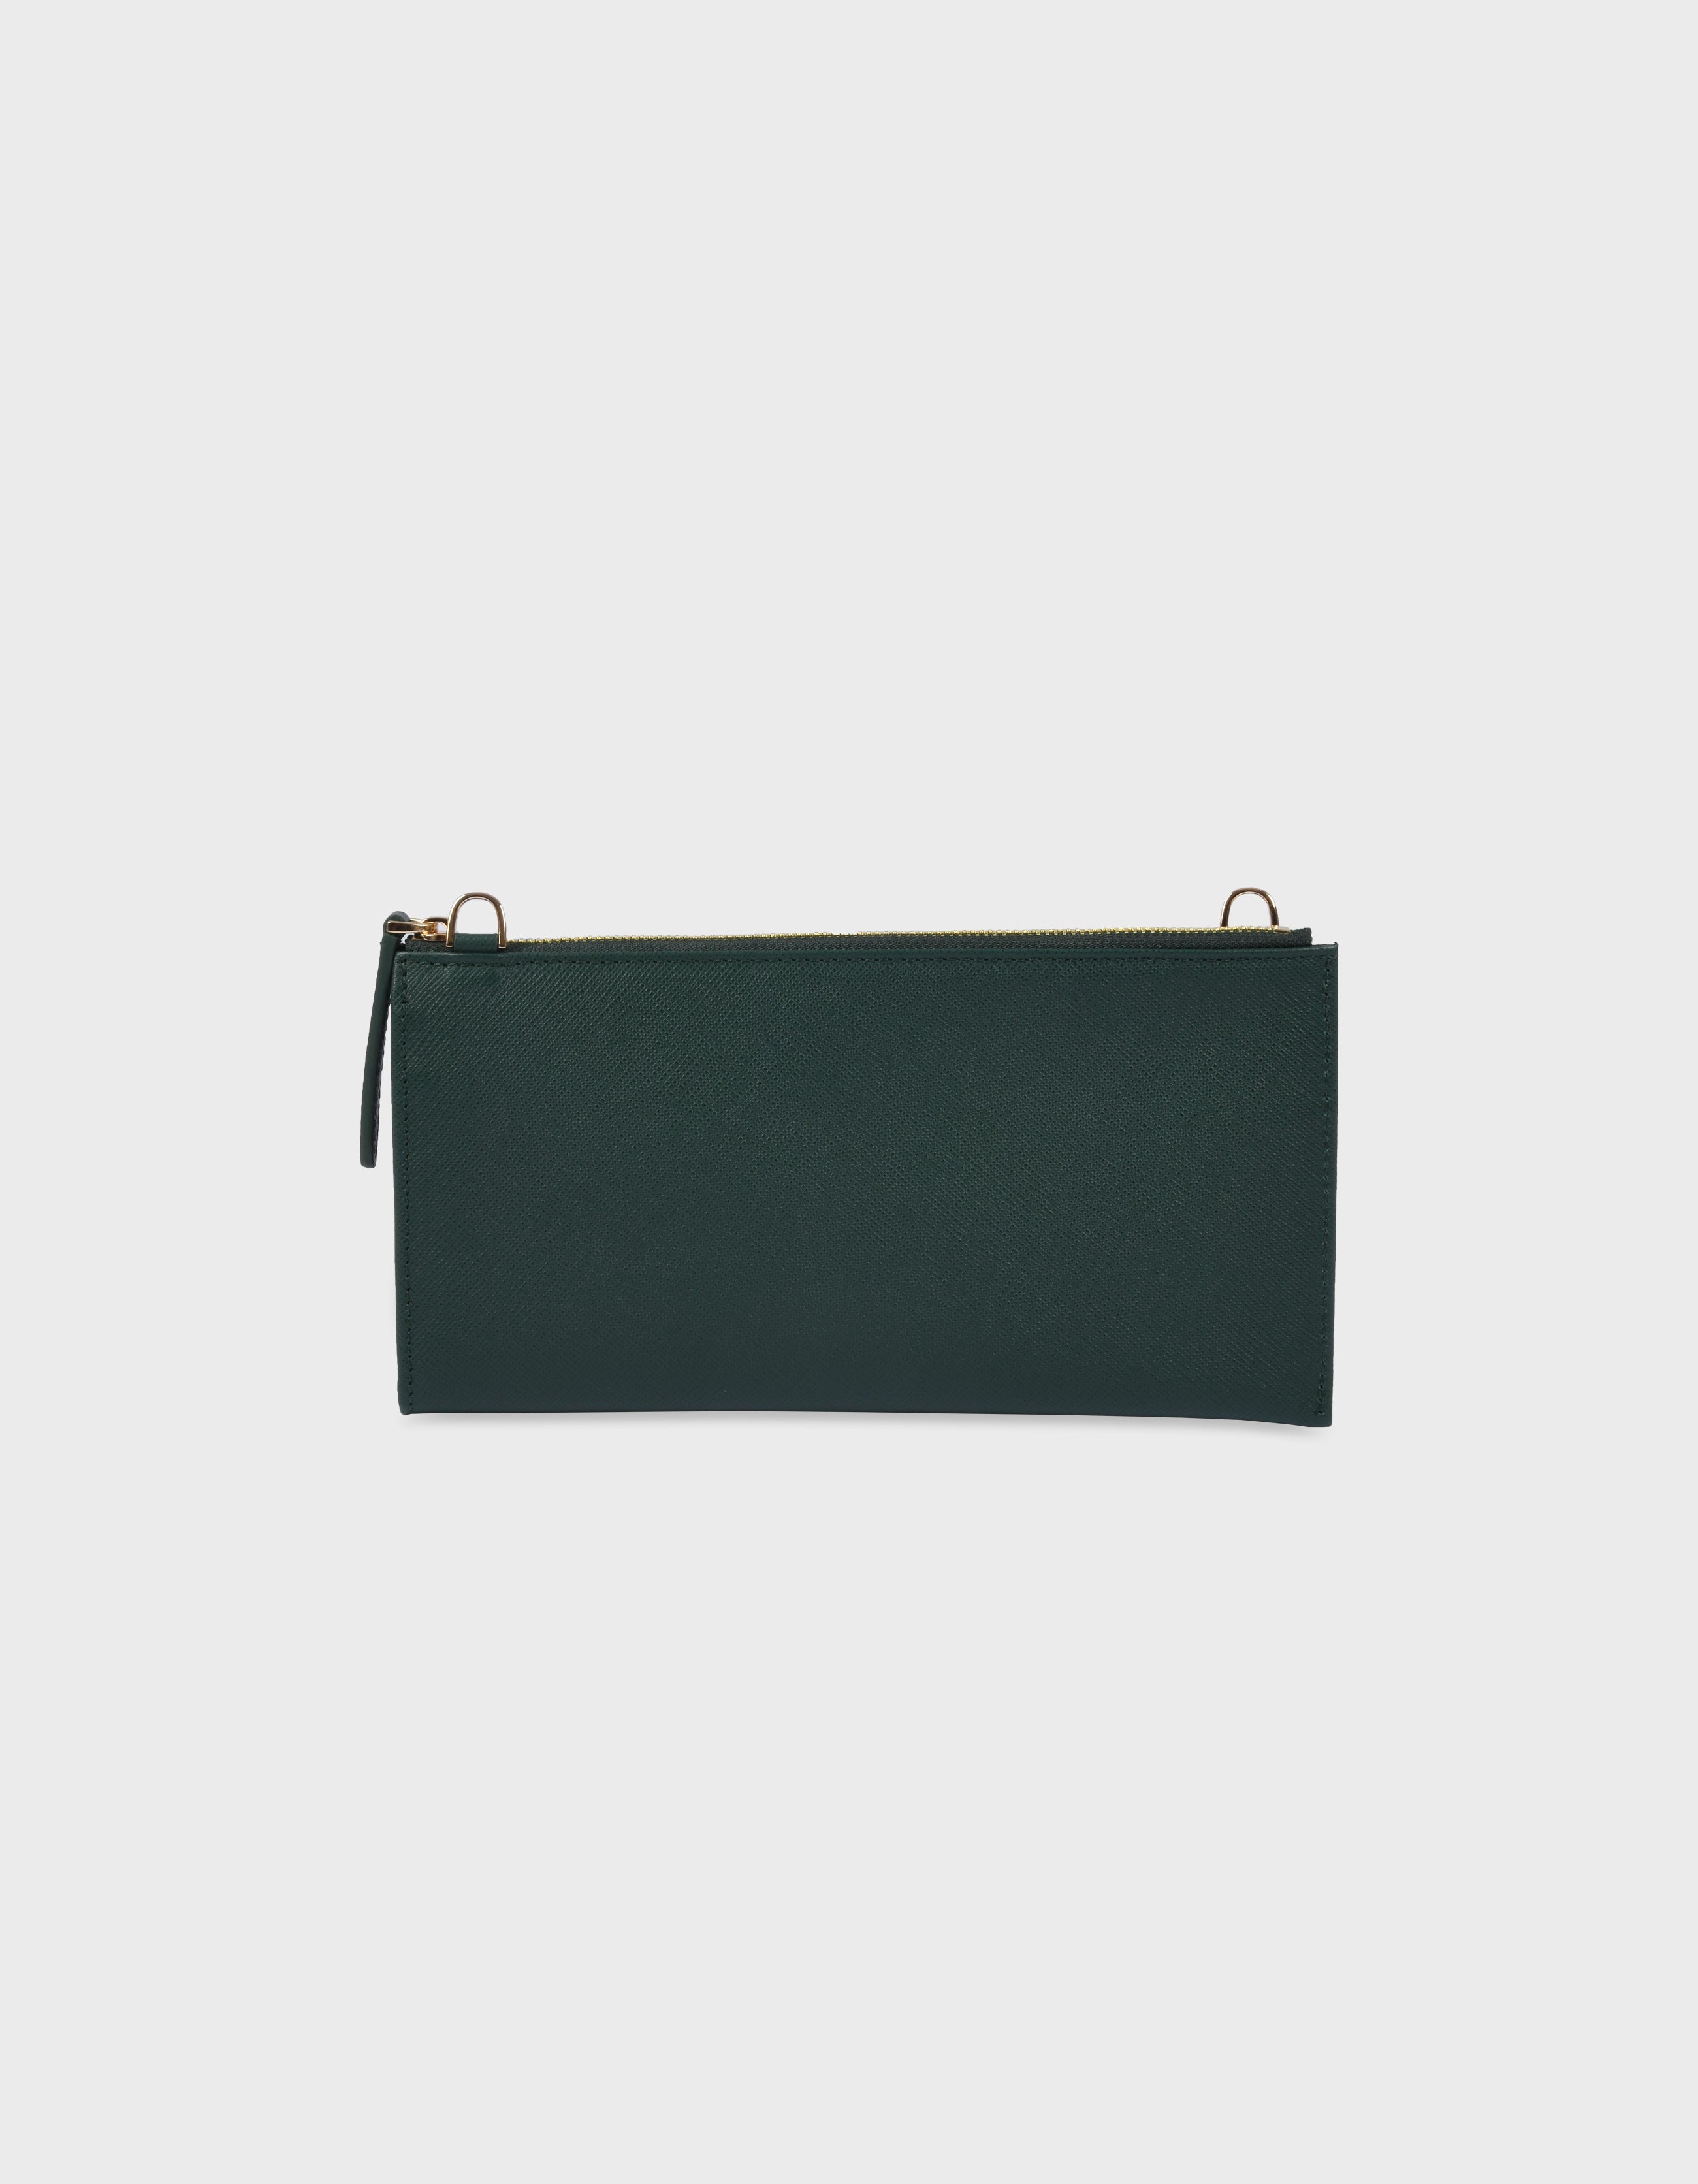 HiVa Atelier | Omnia Chain Bag & Clutch Forest Green | Beautiful and Versatile